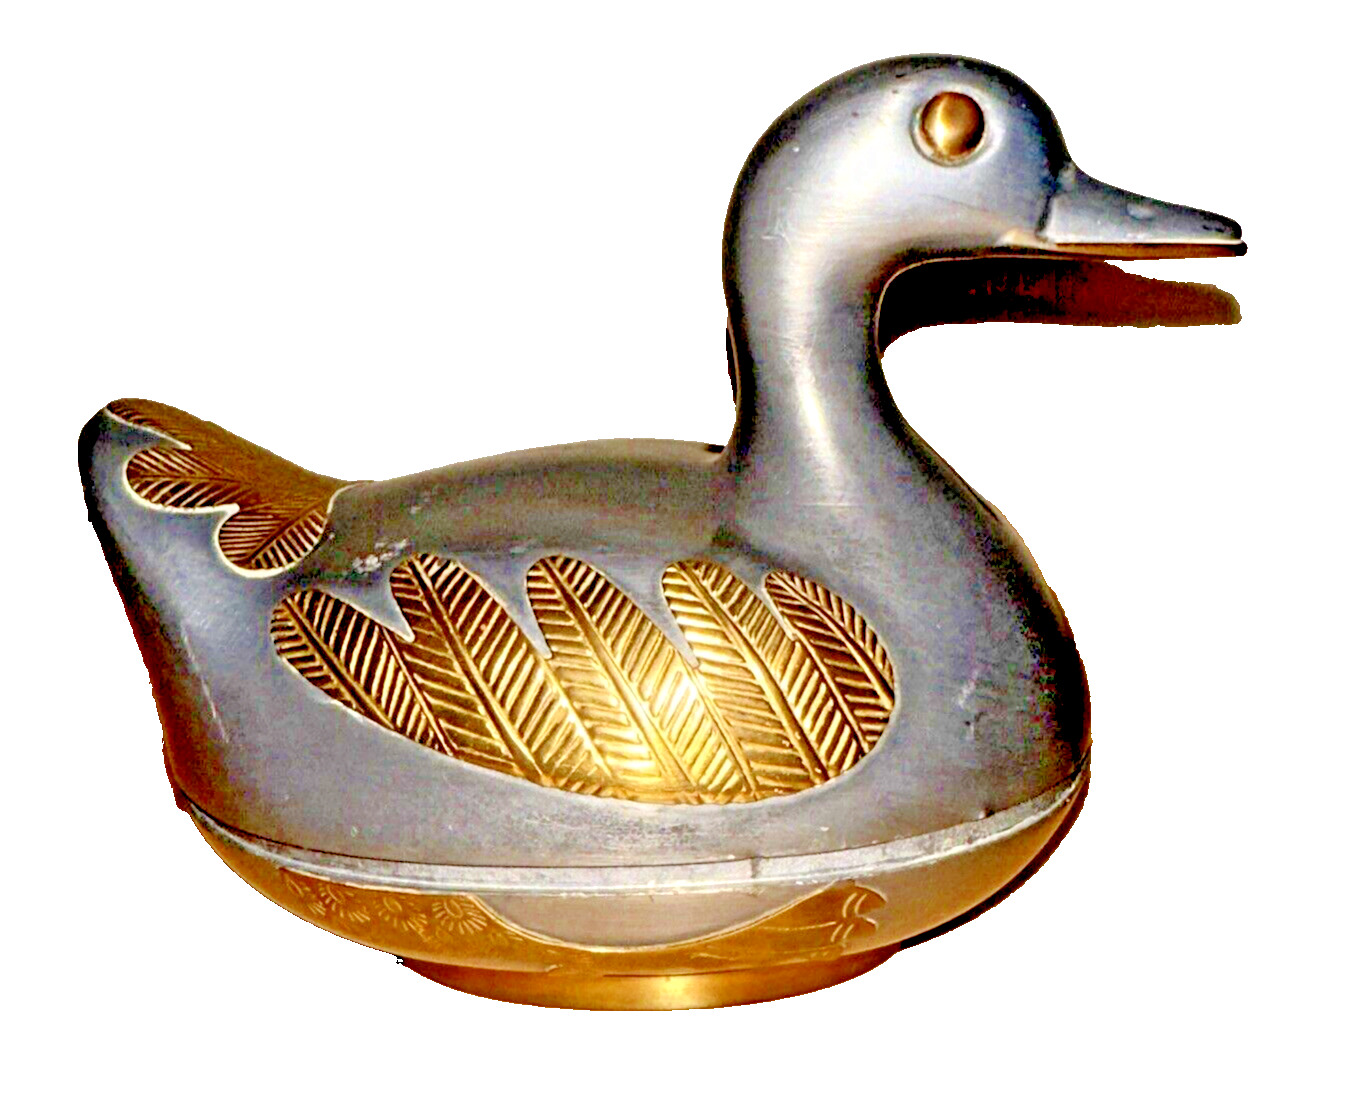 Vtg 1960s Duck Trinket Box Mid Century Pewter Brass Metal Hand Crafted Hong Kong